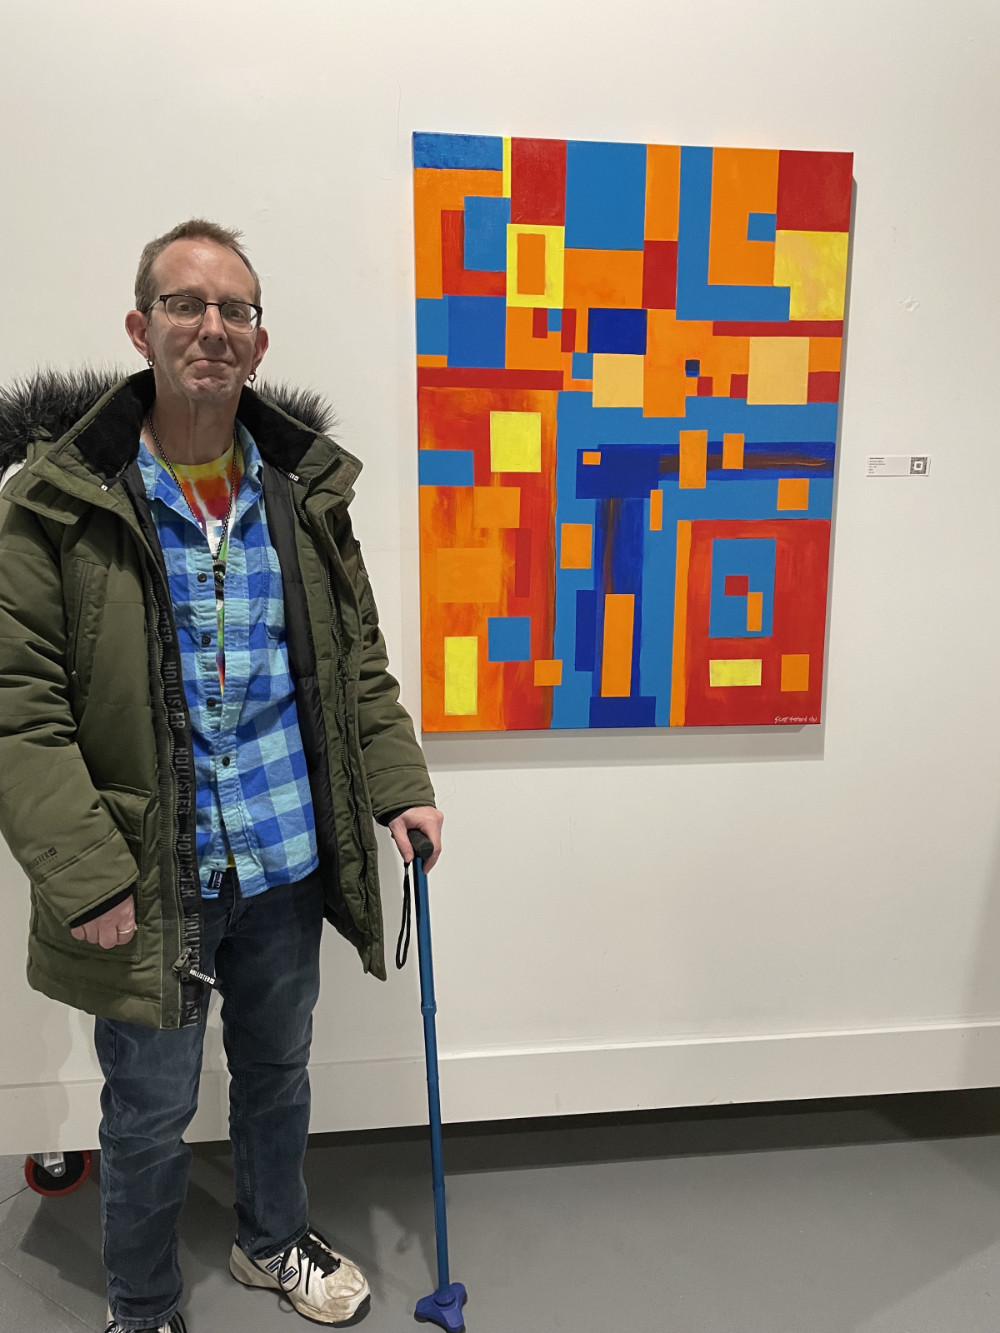 Scott Olmstead at Buffalo Art Movement group show, with his artwork, "Leaning Slightly".